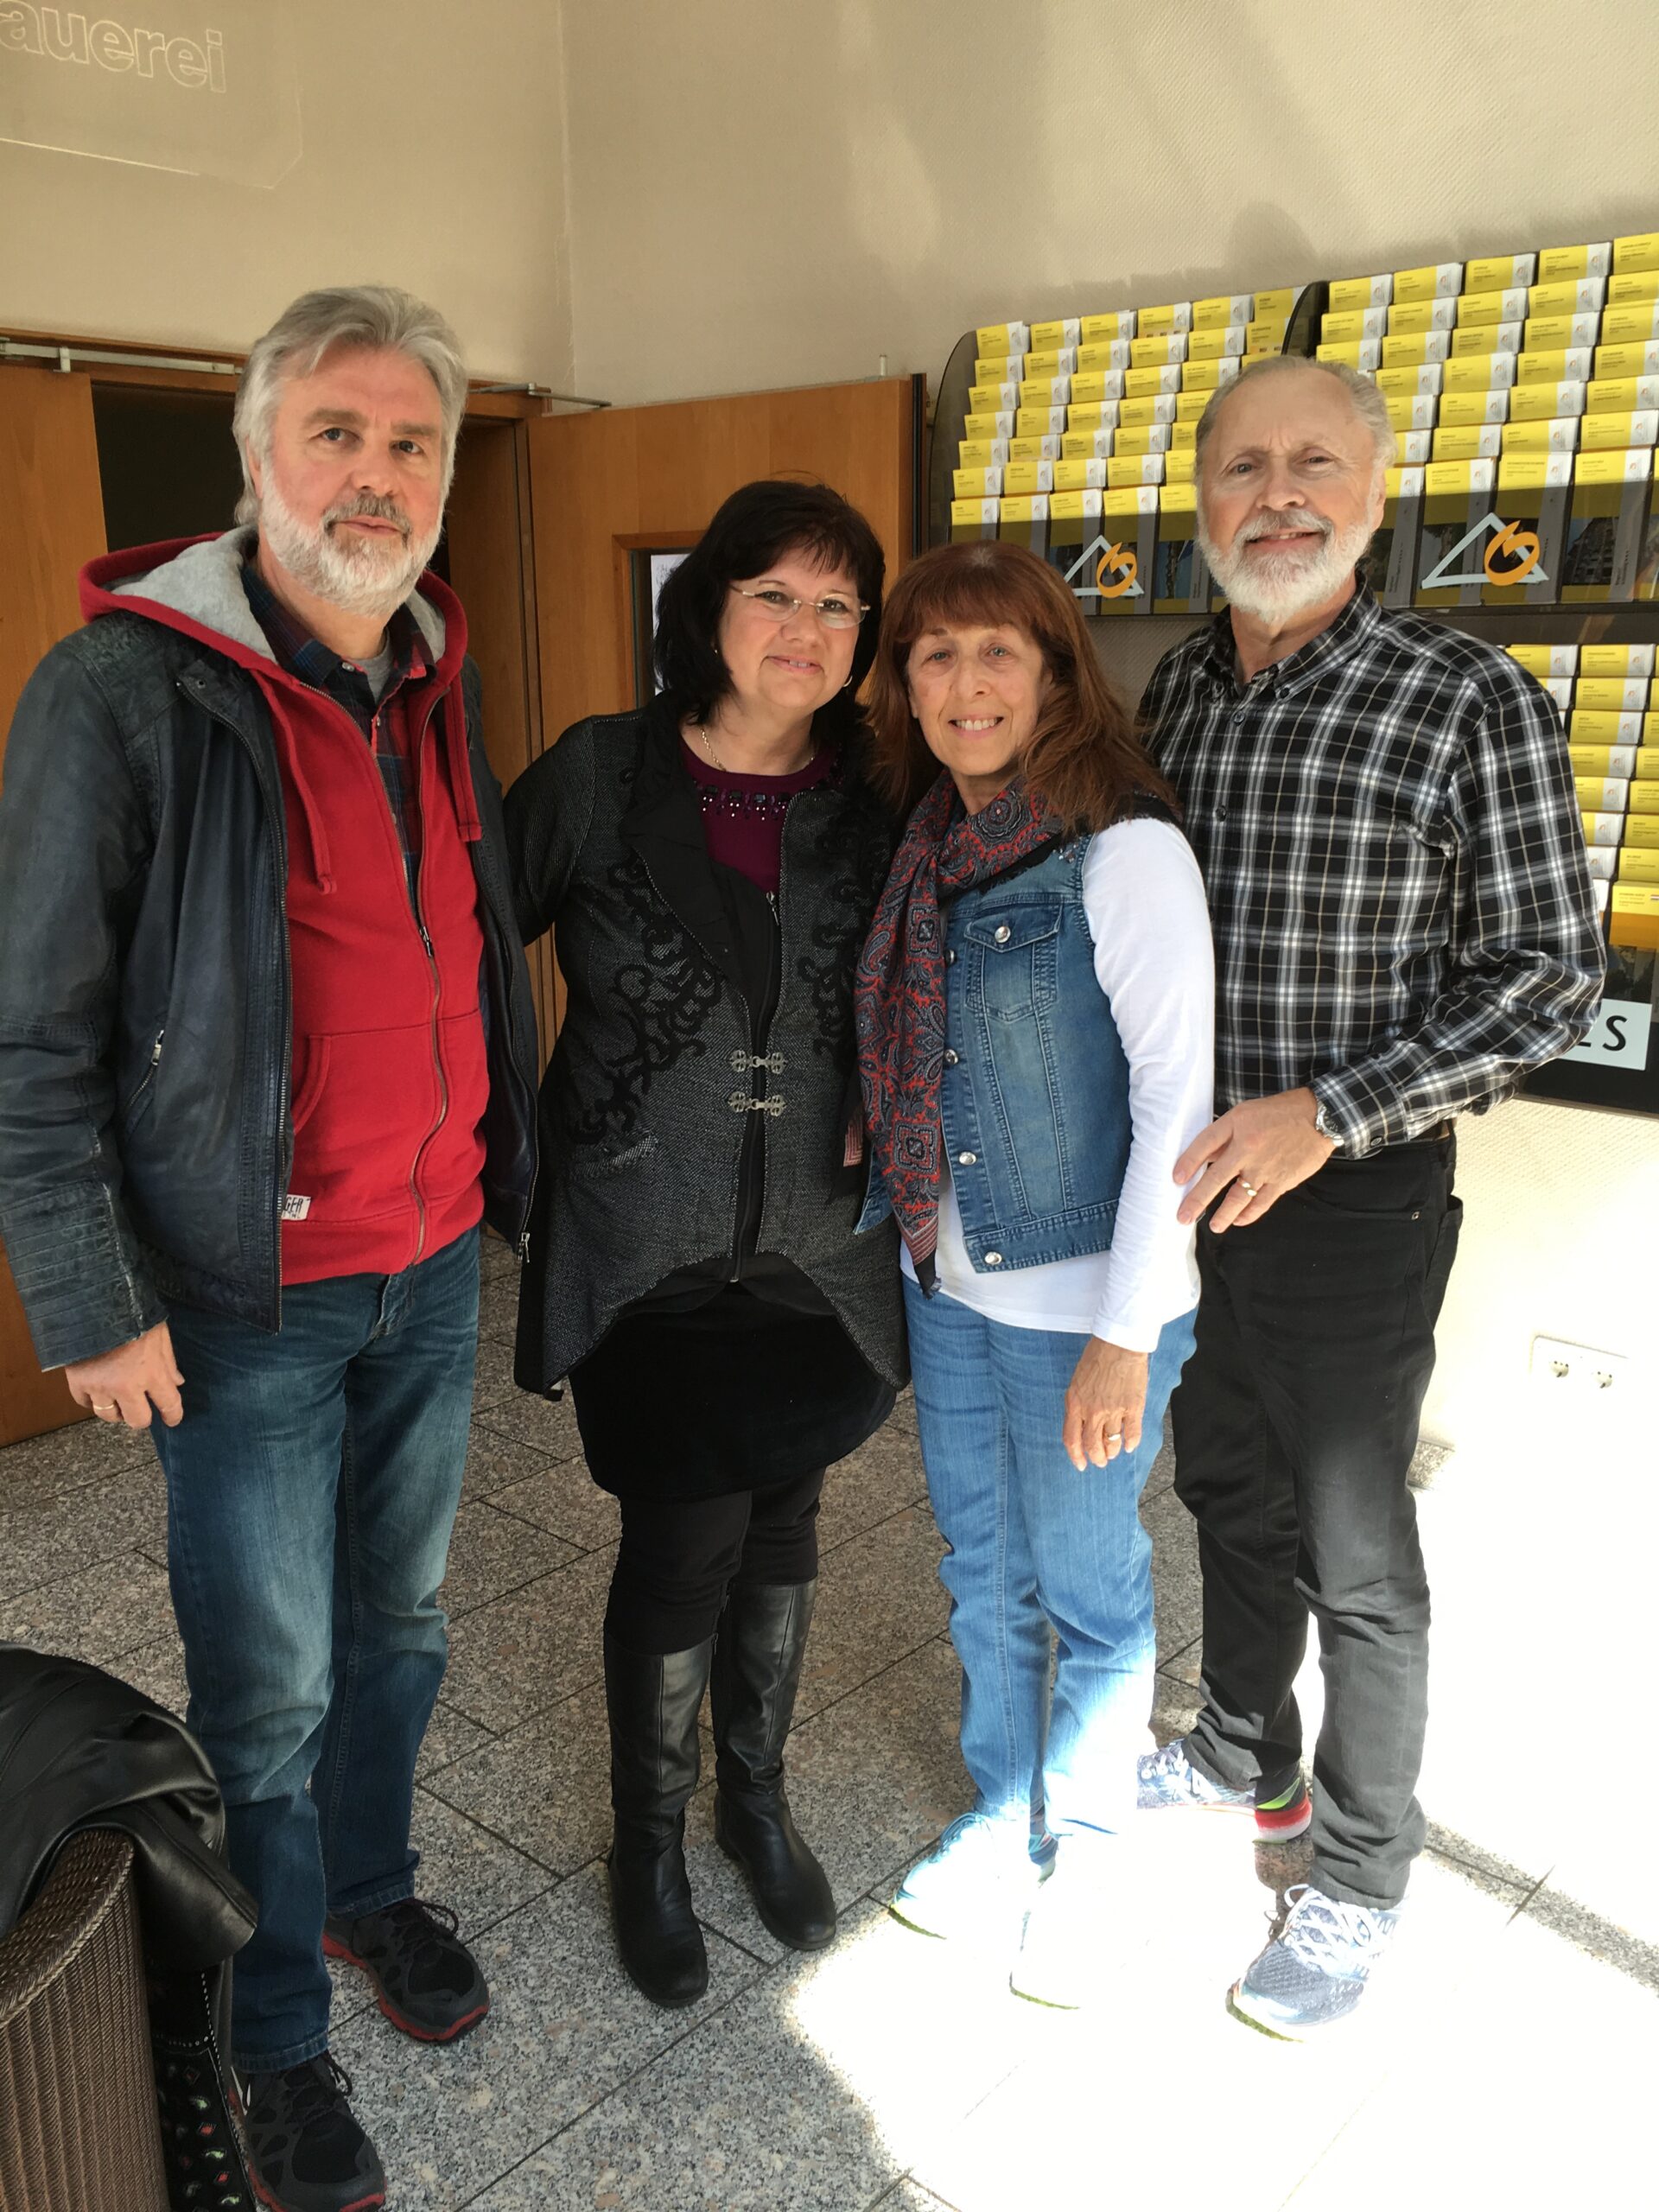 Pastors Gerald and Susan with Pastors Bernhard and Karin Koch in Rinteln, Germany